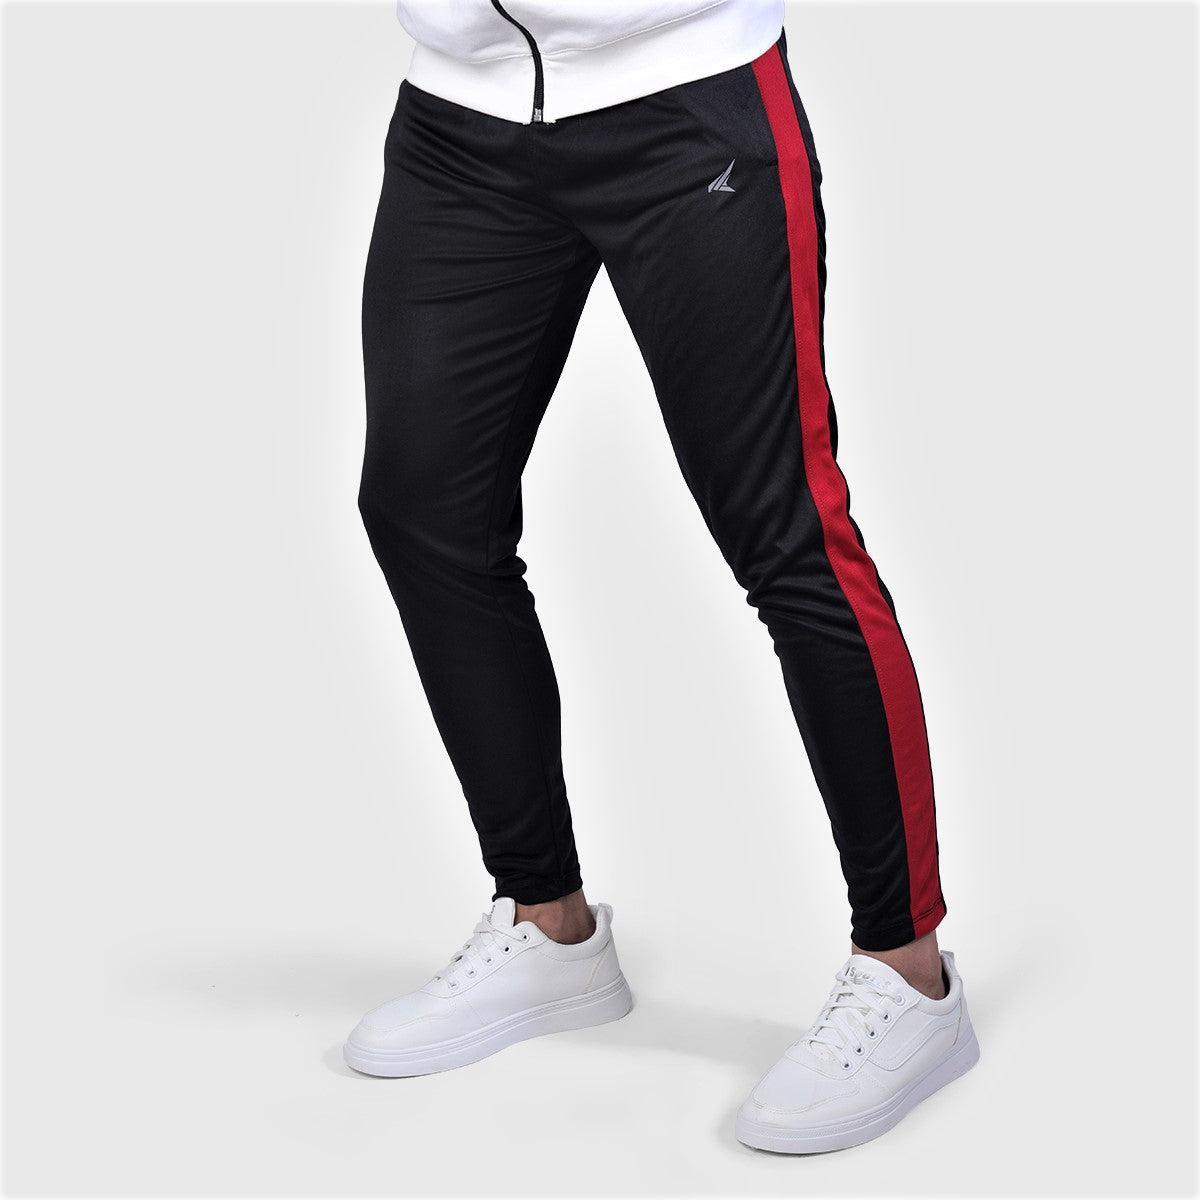 Black Trouser With Red Panel